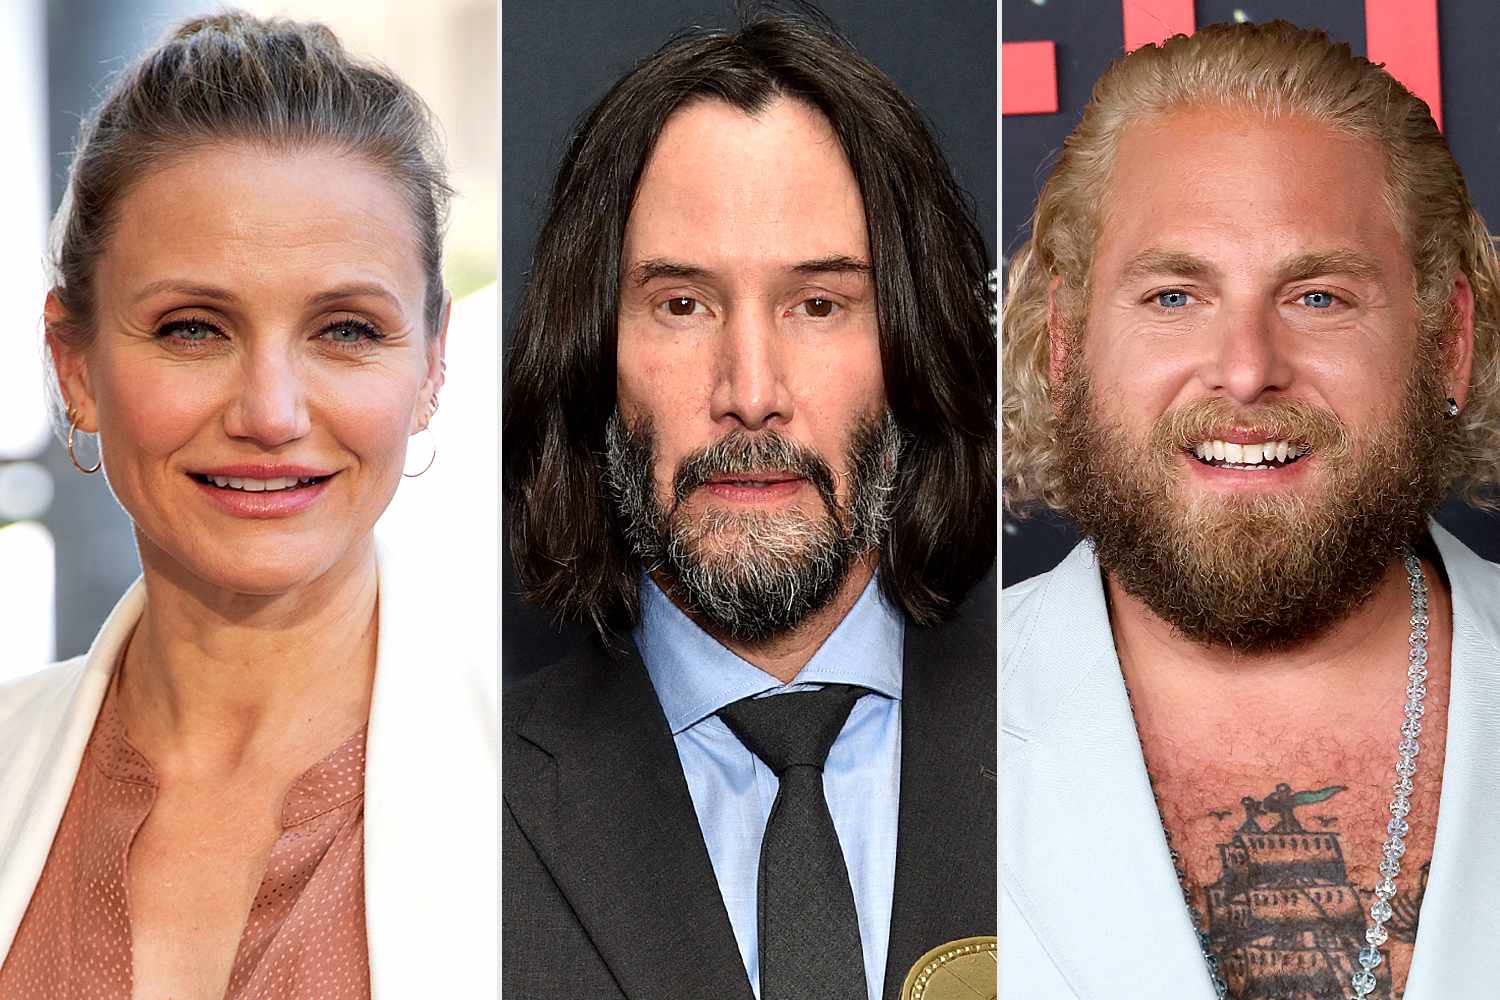 Cameron Diaz in Talks to Star with Keanu Reeves in Movie Directed by Jonah Hill